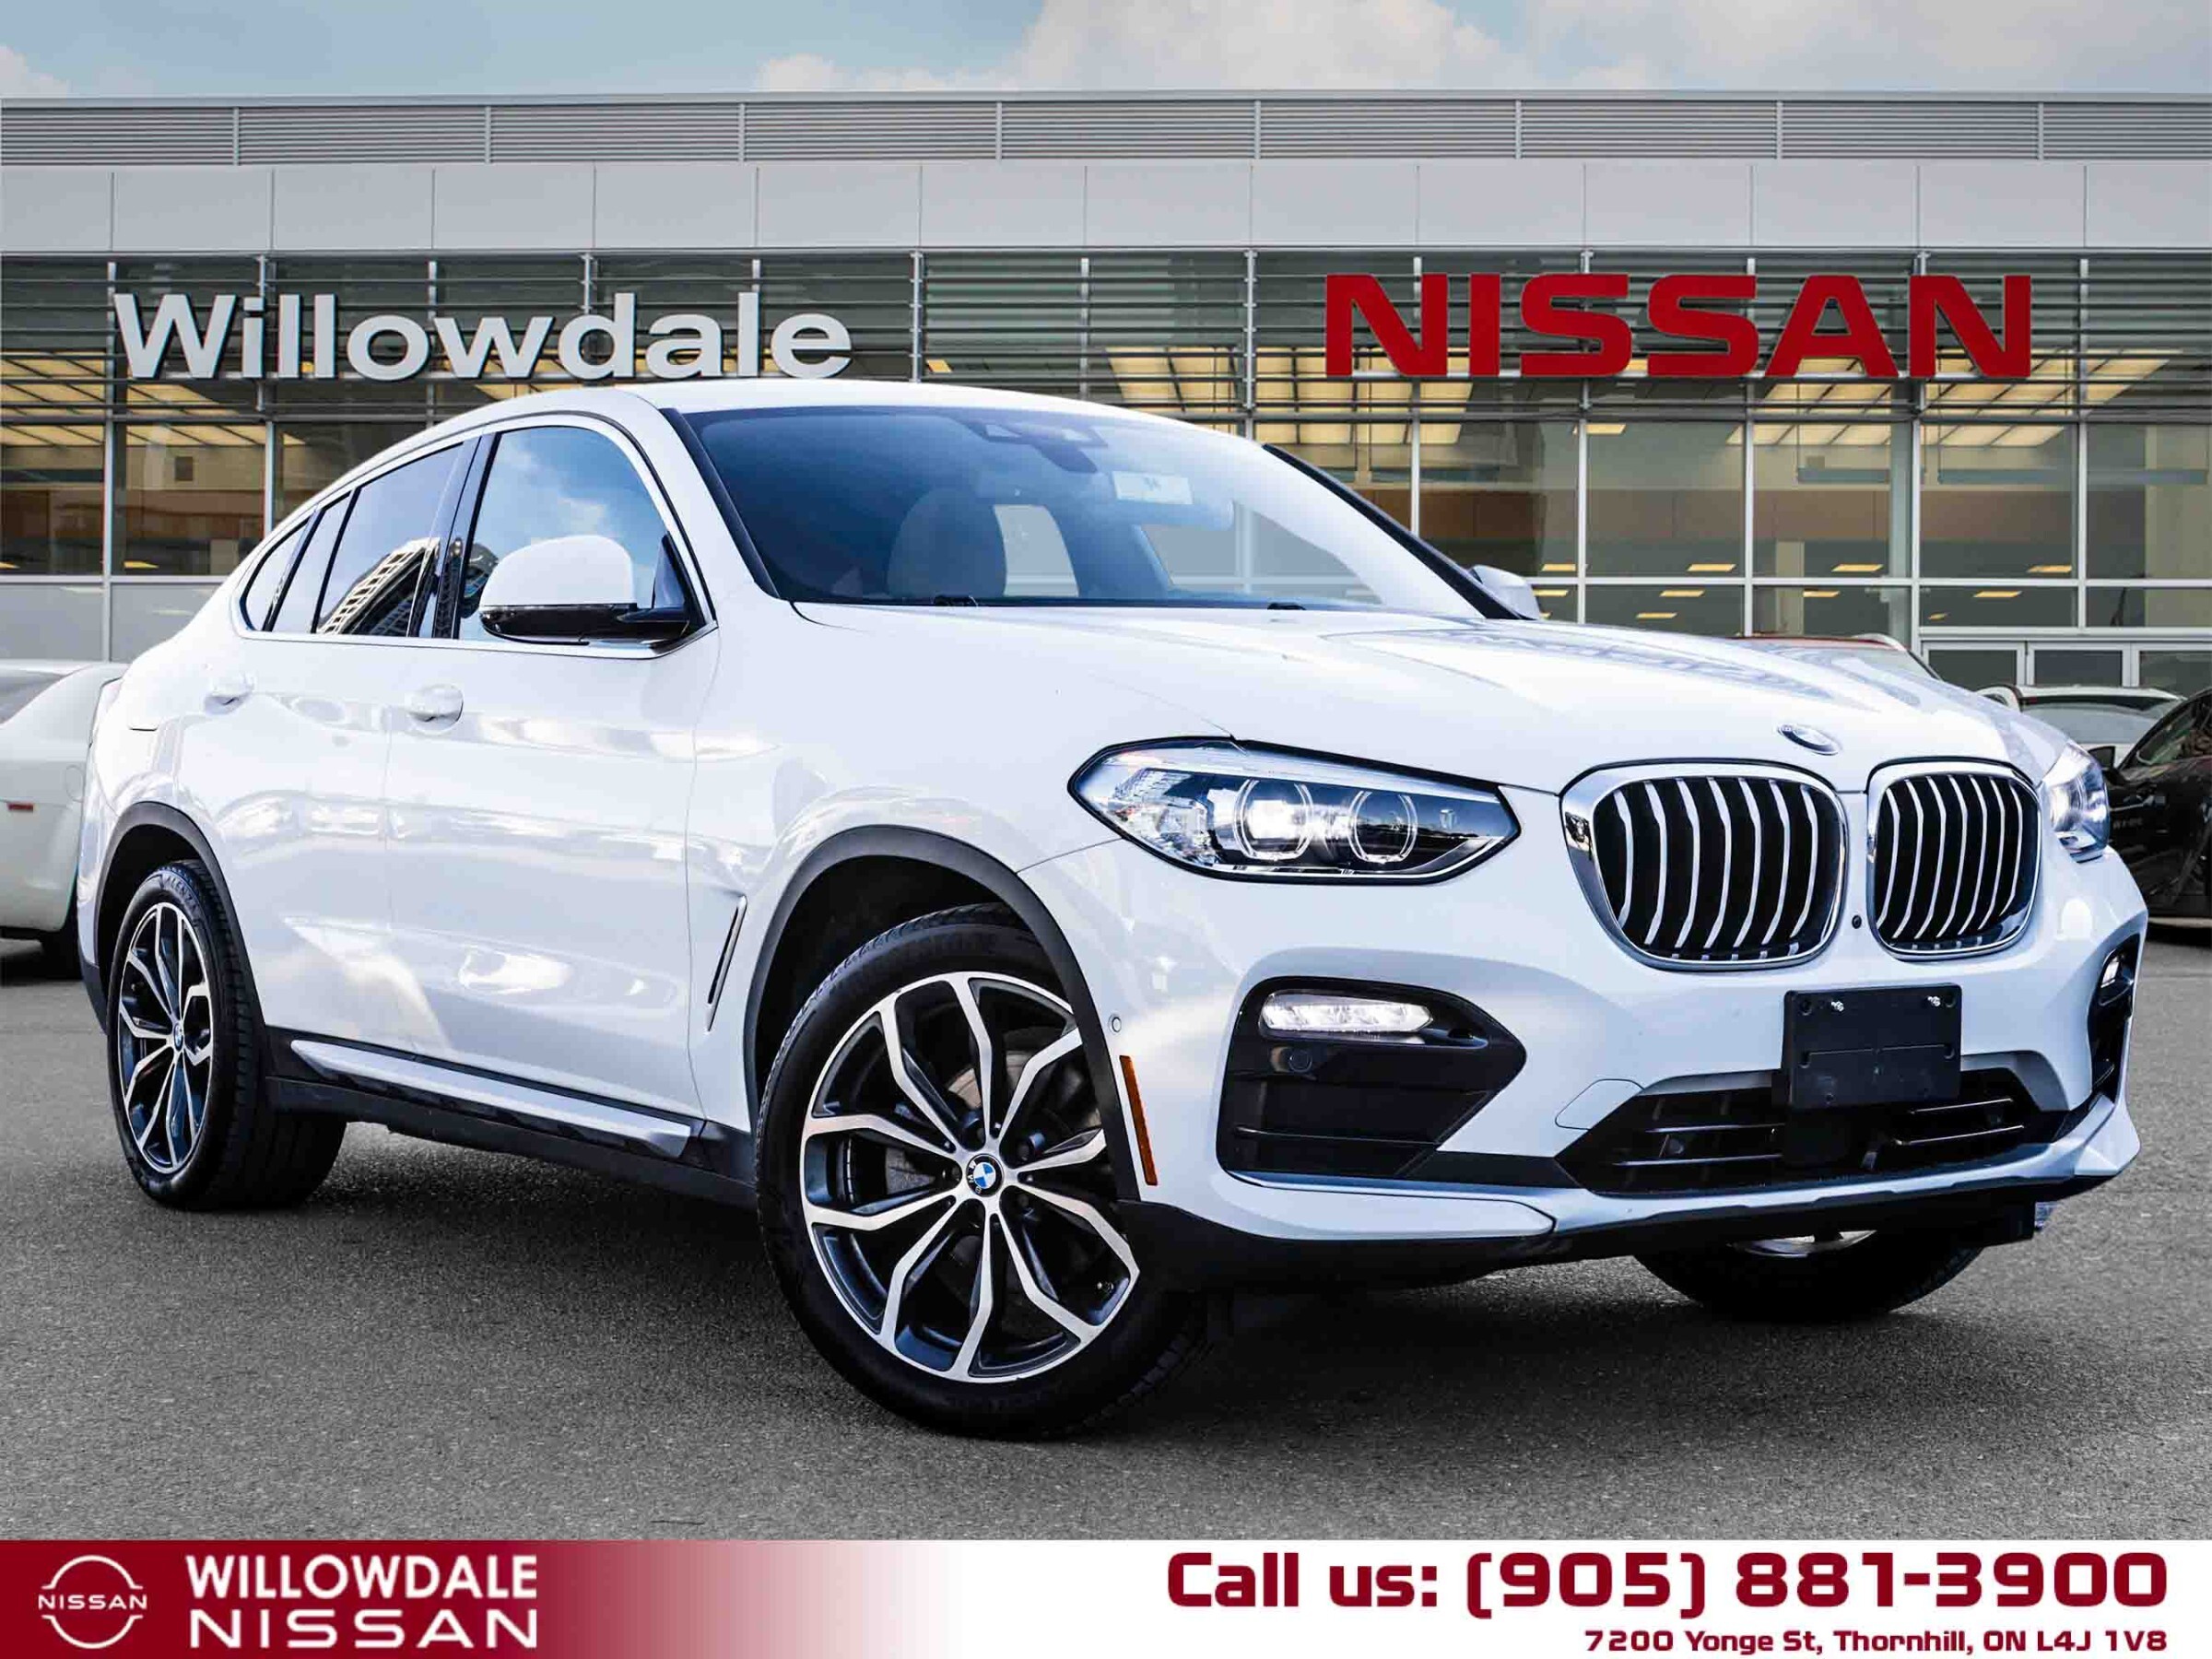 2019 BMW X4 xDrive30i - SALE EVENT MAY 24- MAY 25